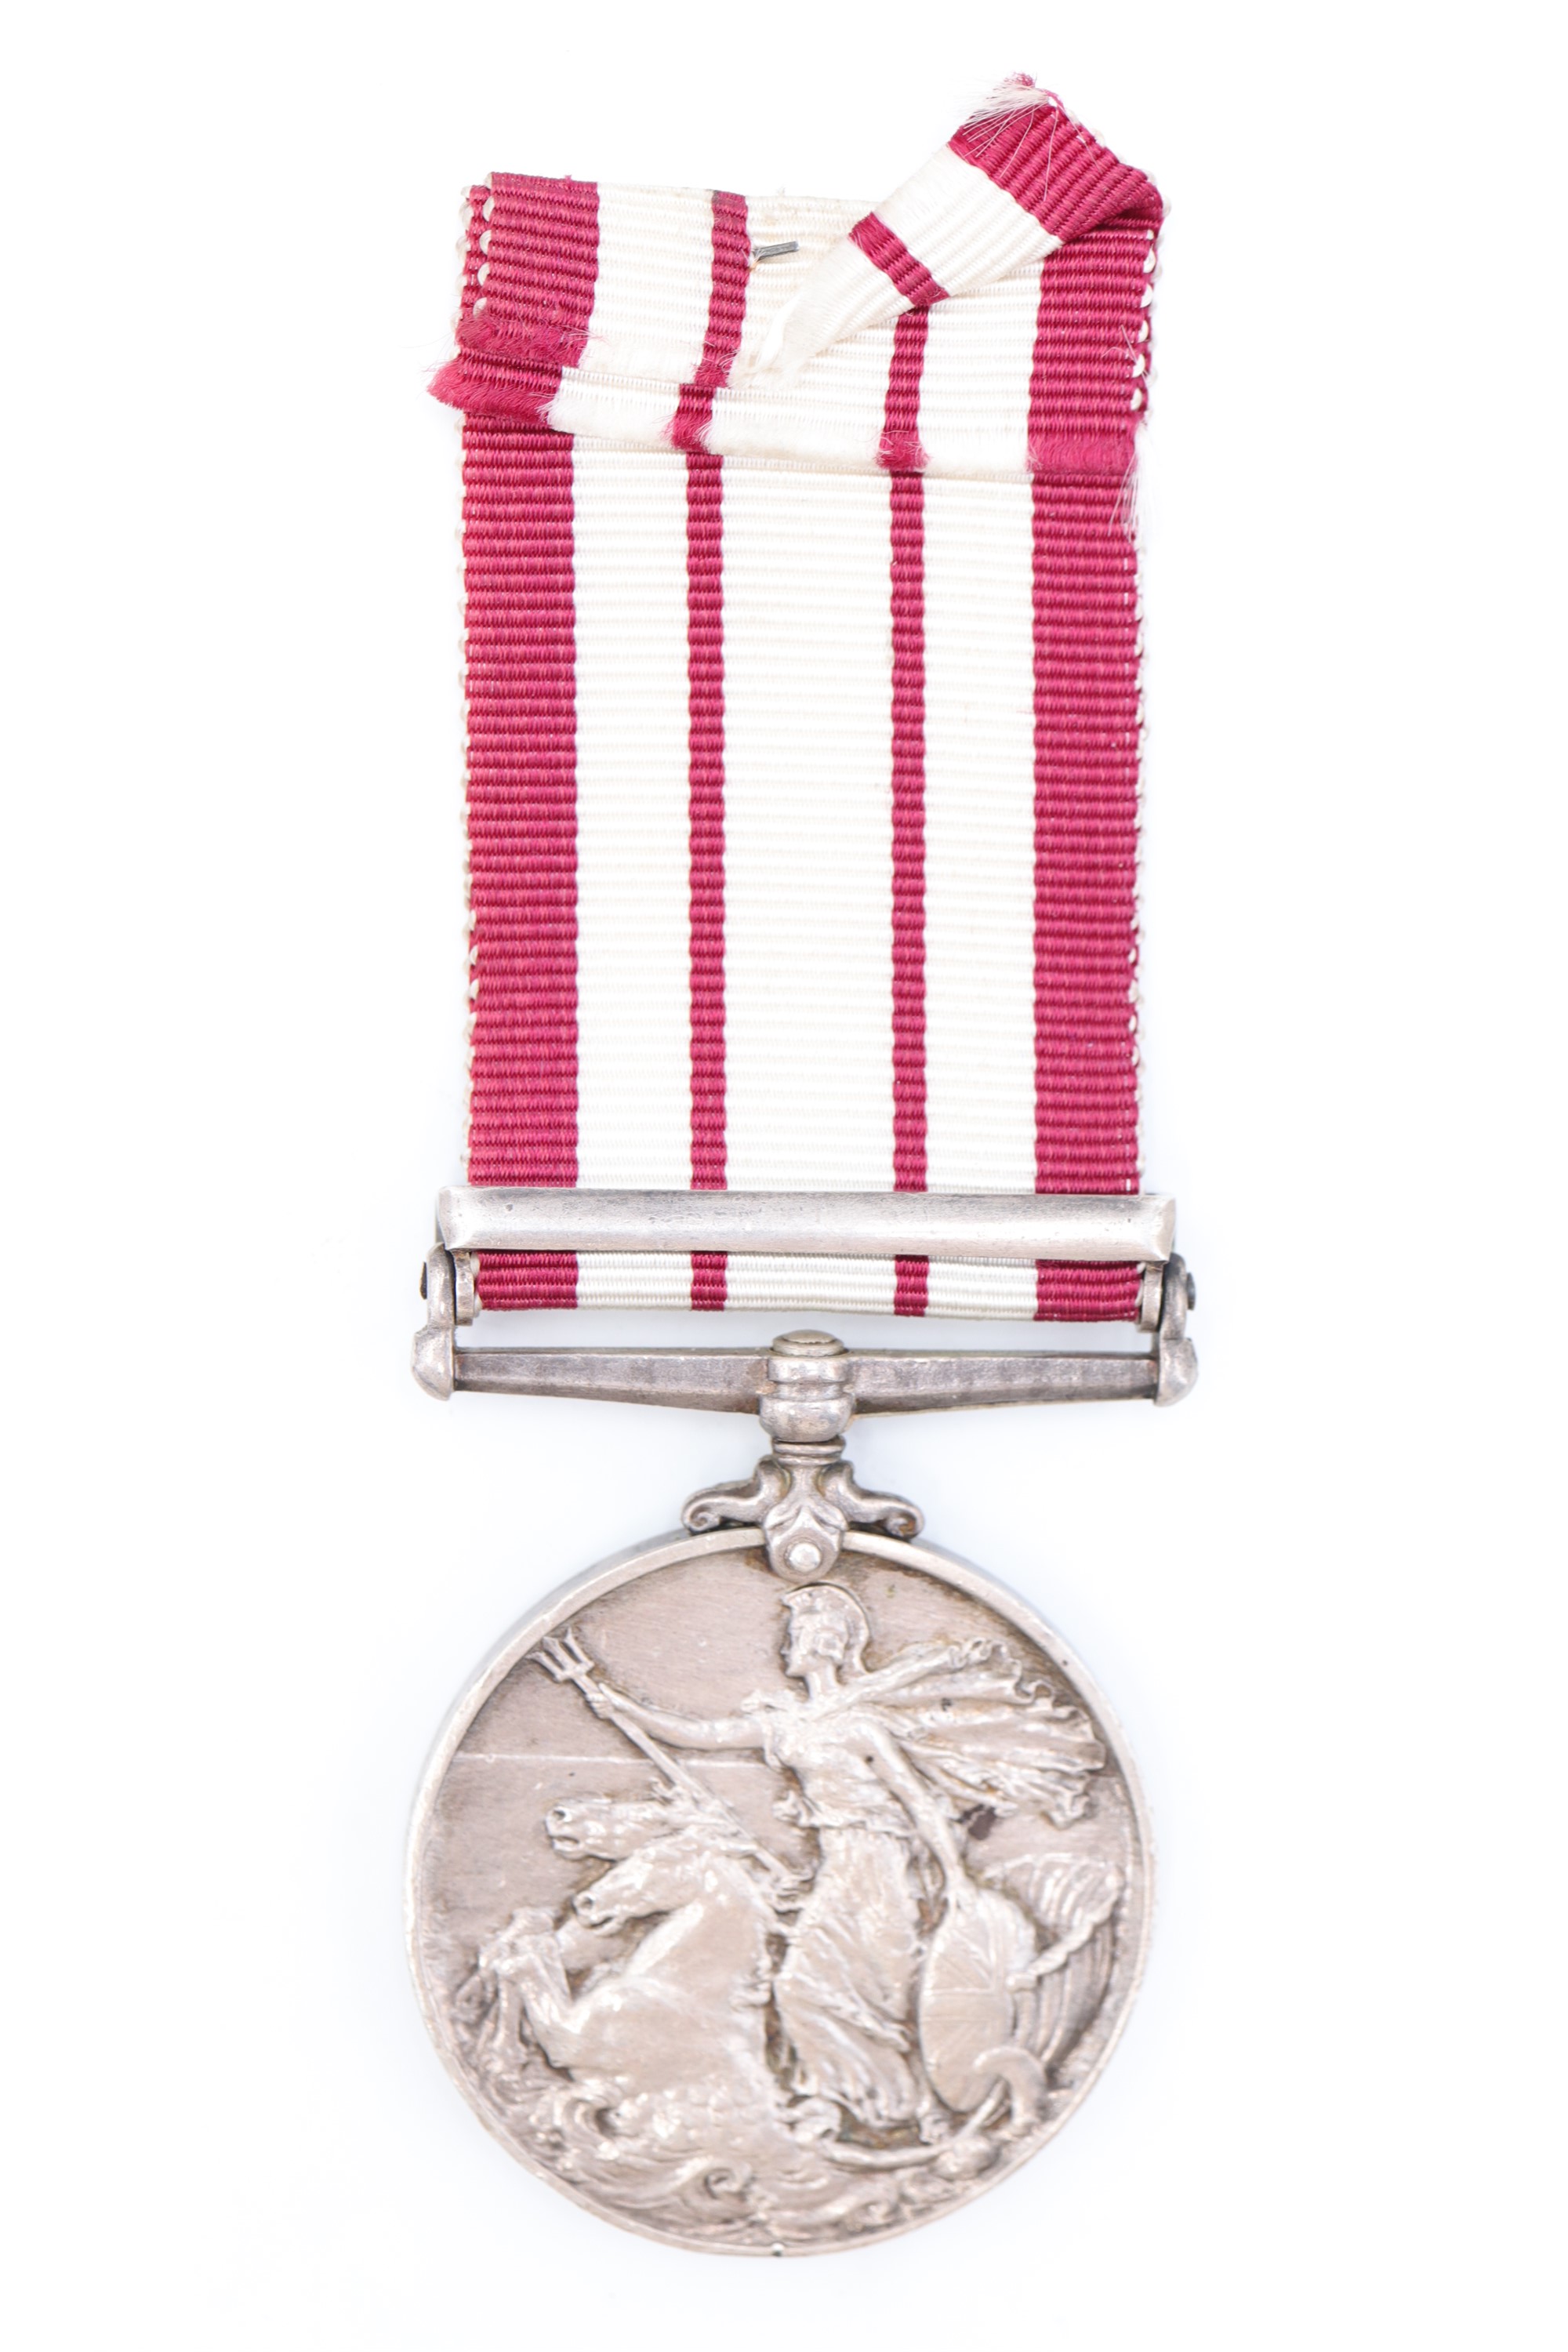 A Naval General Service Medal with Persian Gulf 1909 - 1914 clasp to 310166 S Atwill, Lg Sto, HMS - Image 2 of 6